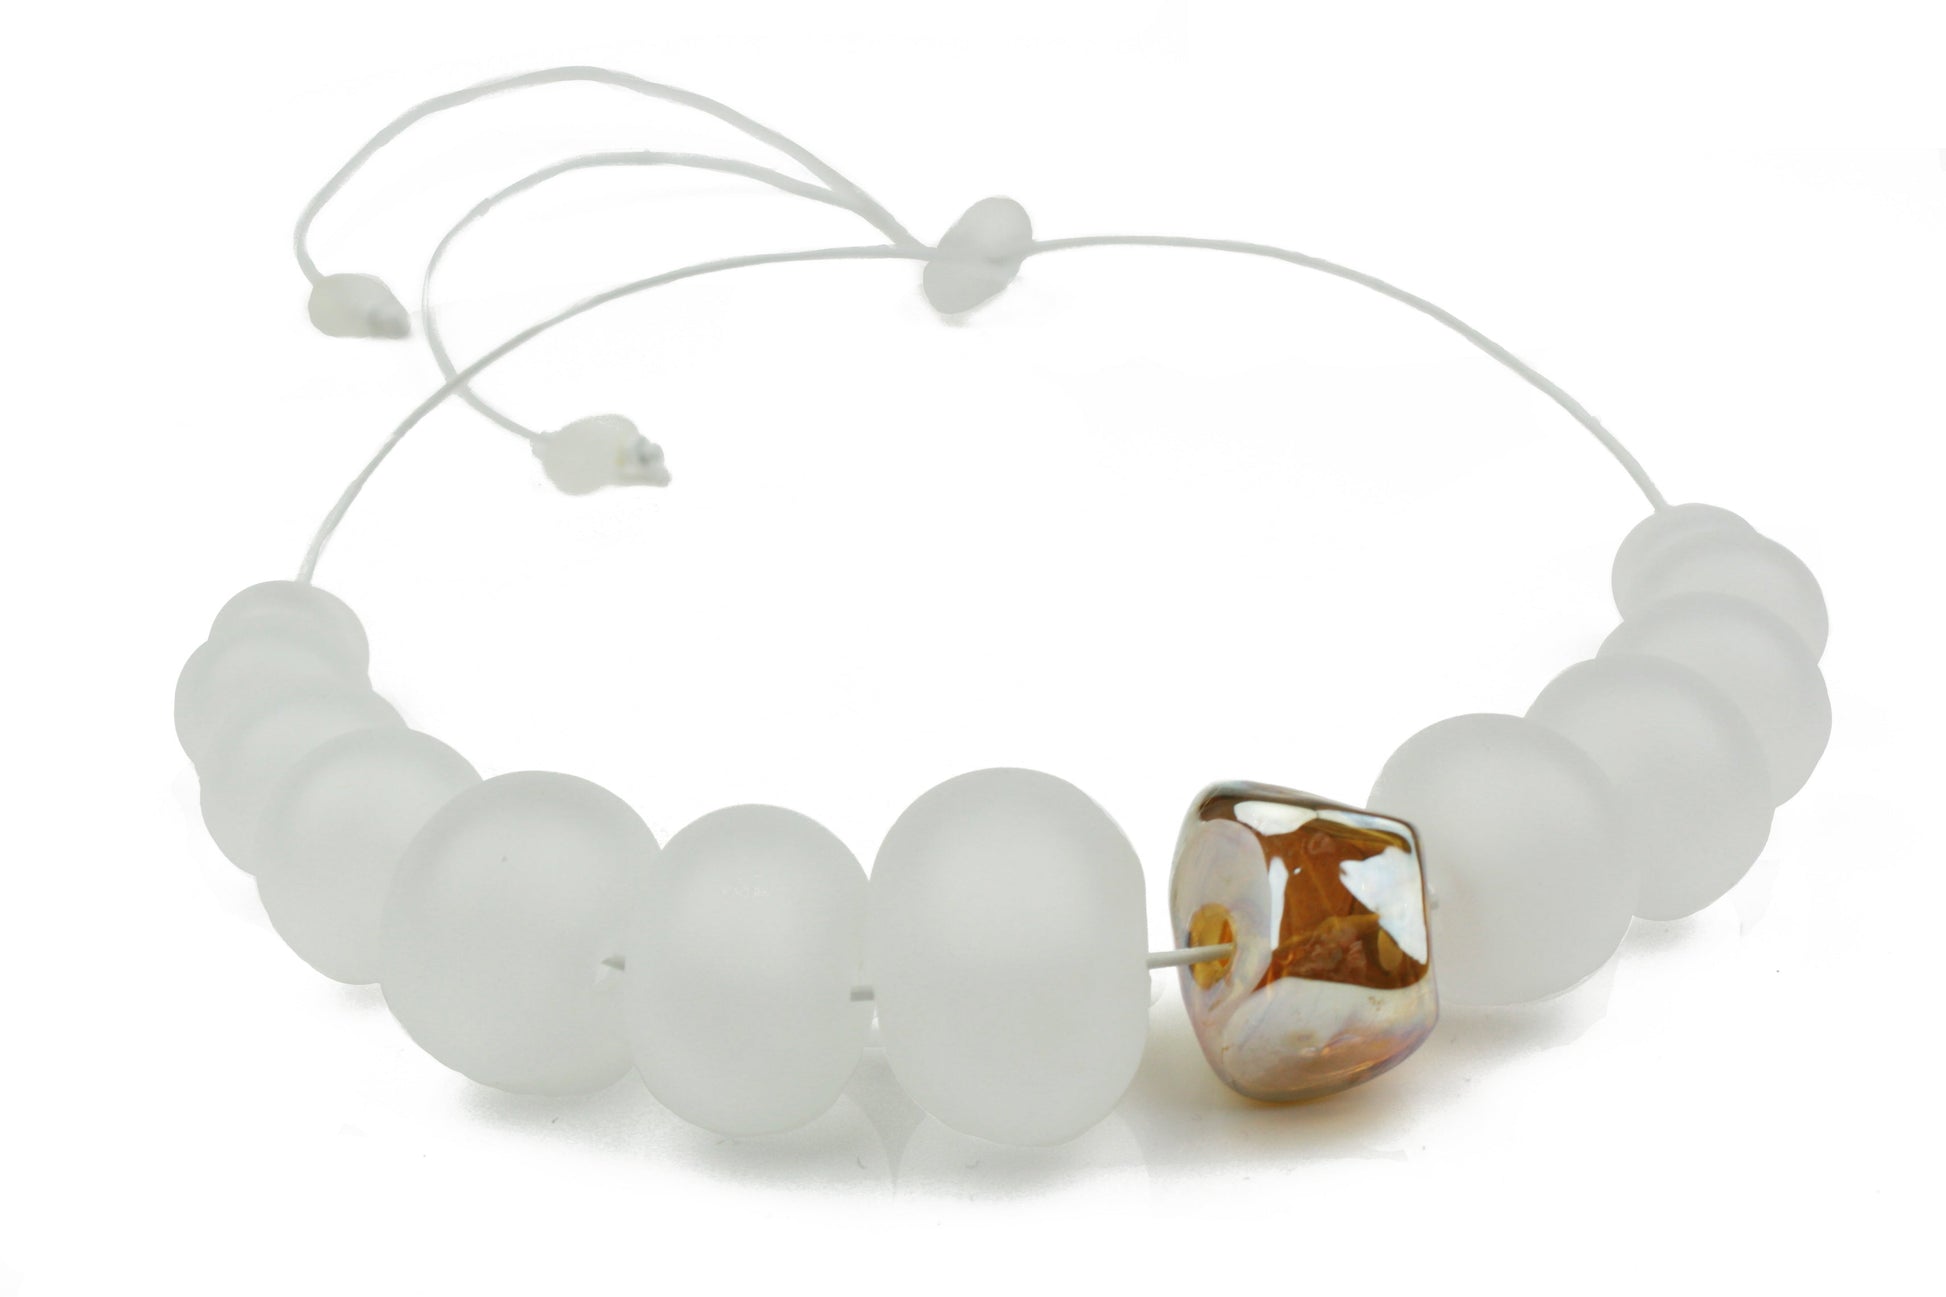 Necklace of hand blown and sandblasted hollow beads in soft white glass paired with a gold glass nugget bead and strung on adjustable leather